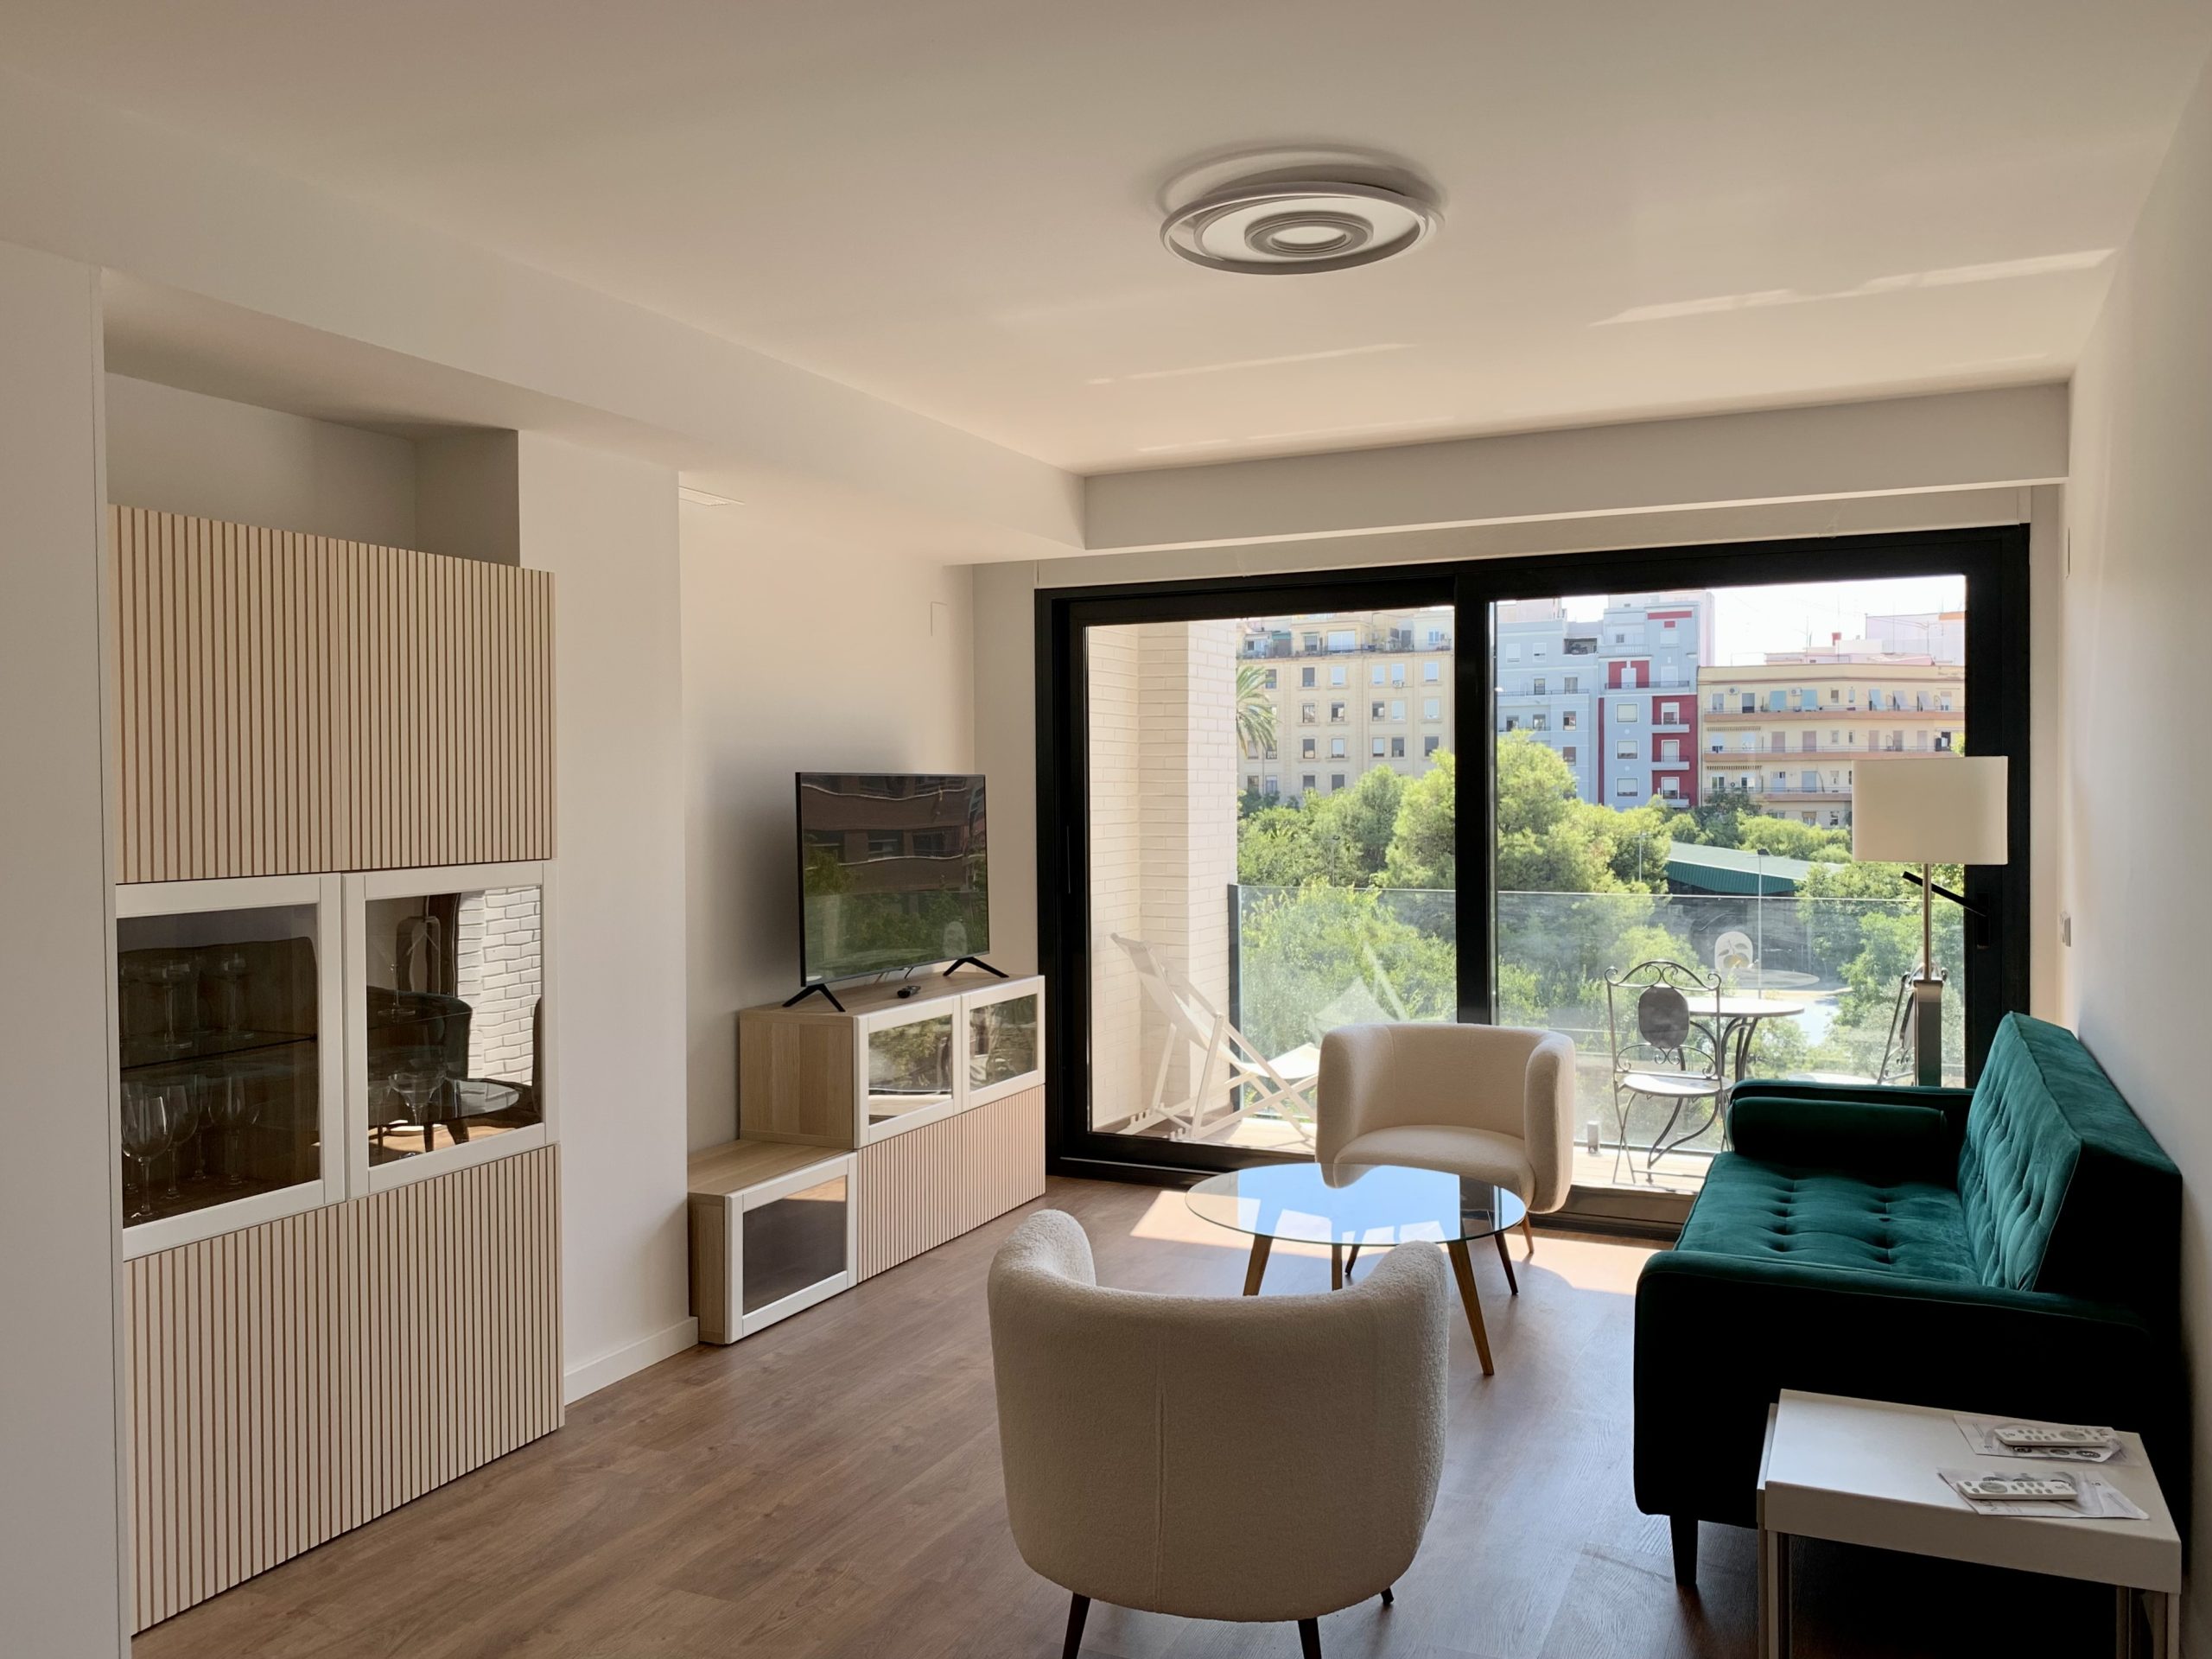 Palleter - Exclusive apartment for rent in Valencia